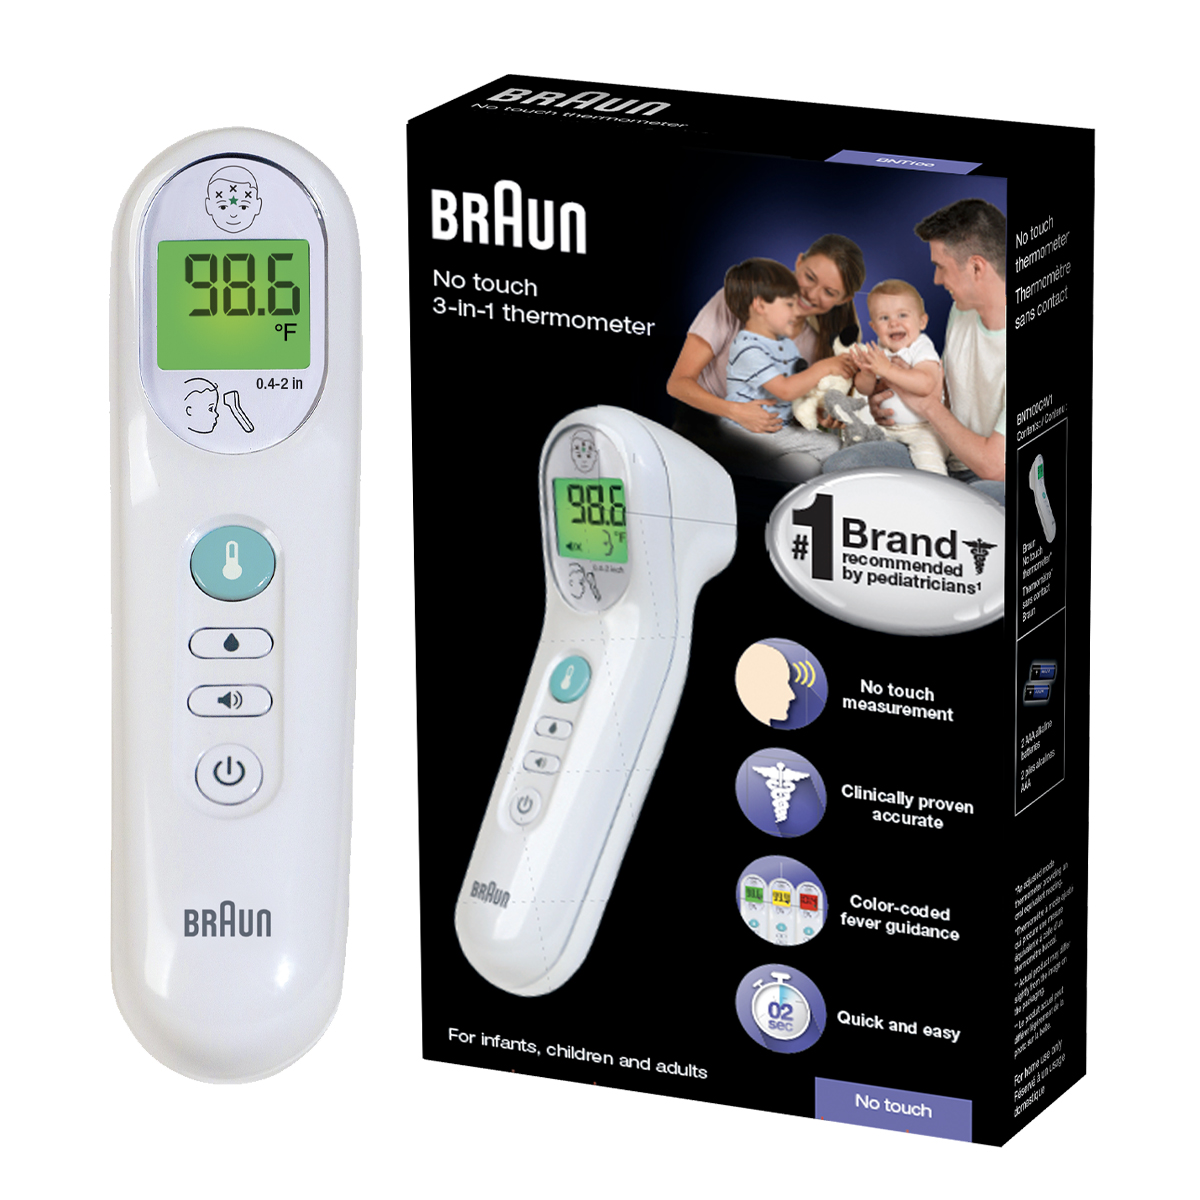 Braun 3-in-1 Digital No Touch Thermometer, Suitable for All Ages, BNT100US, White - image 1 of 10